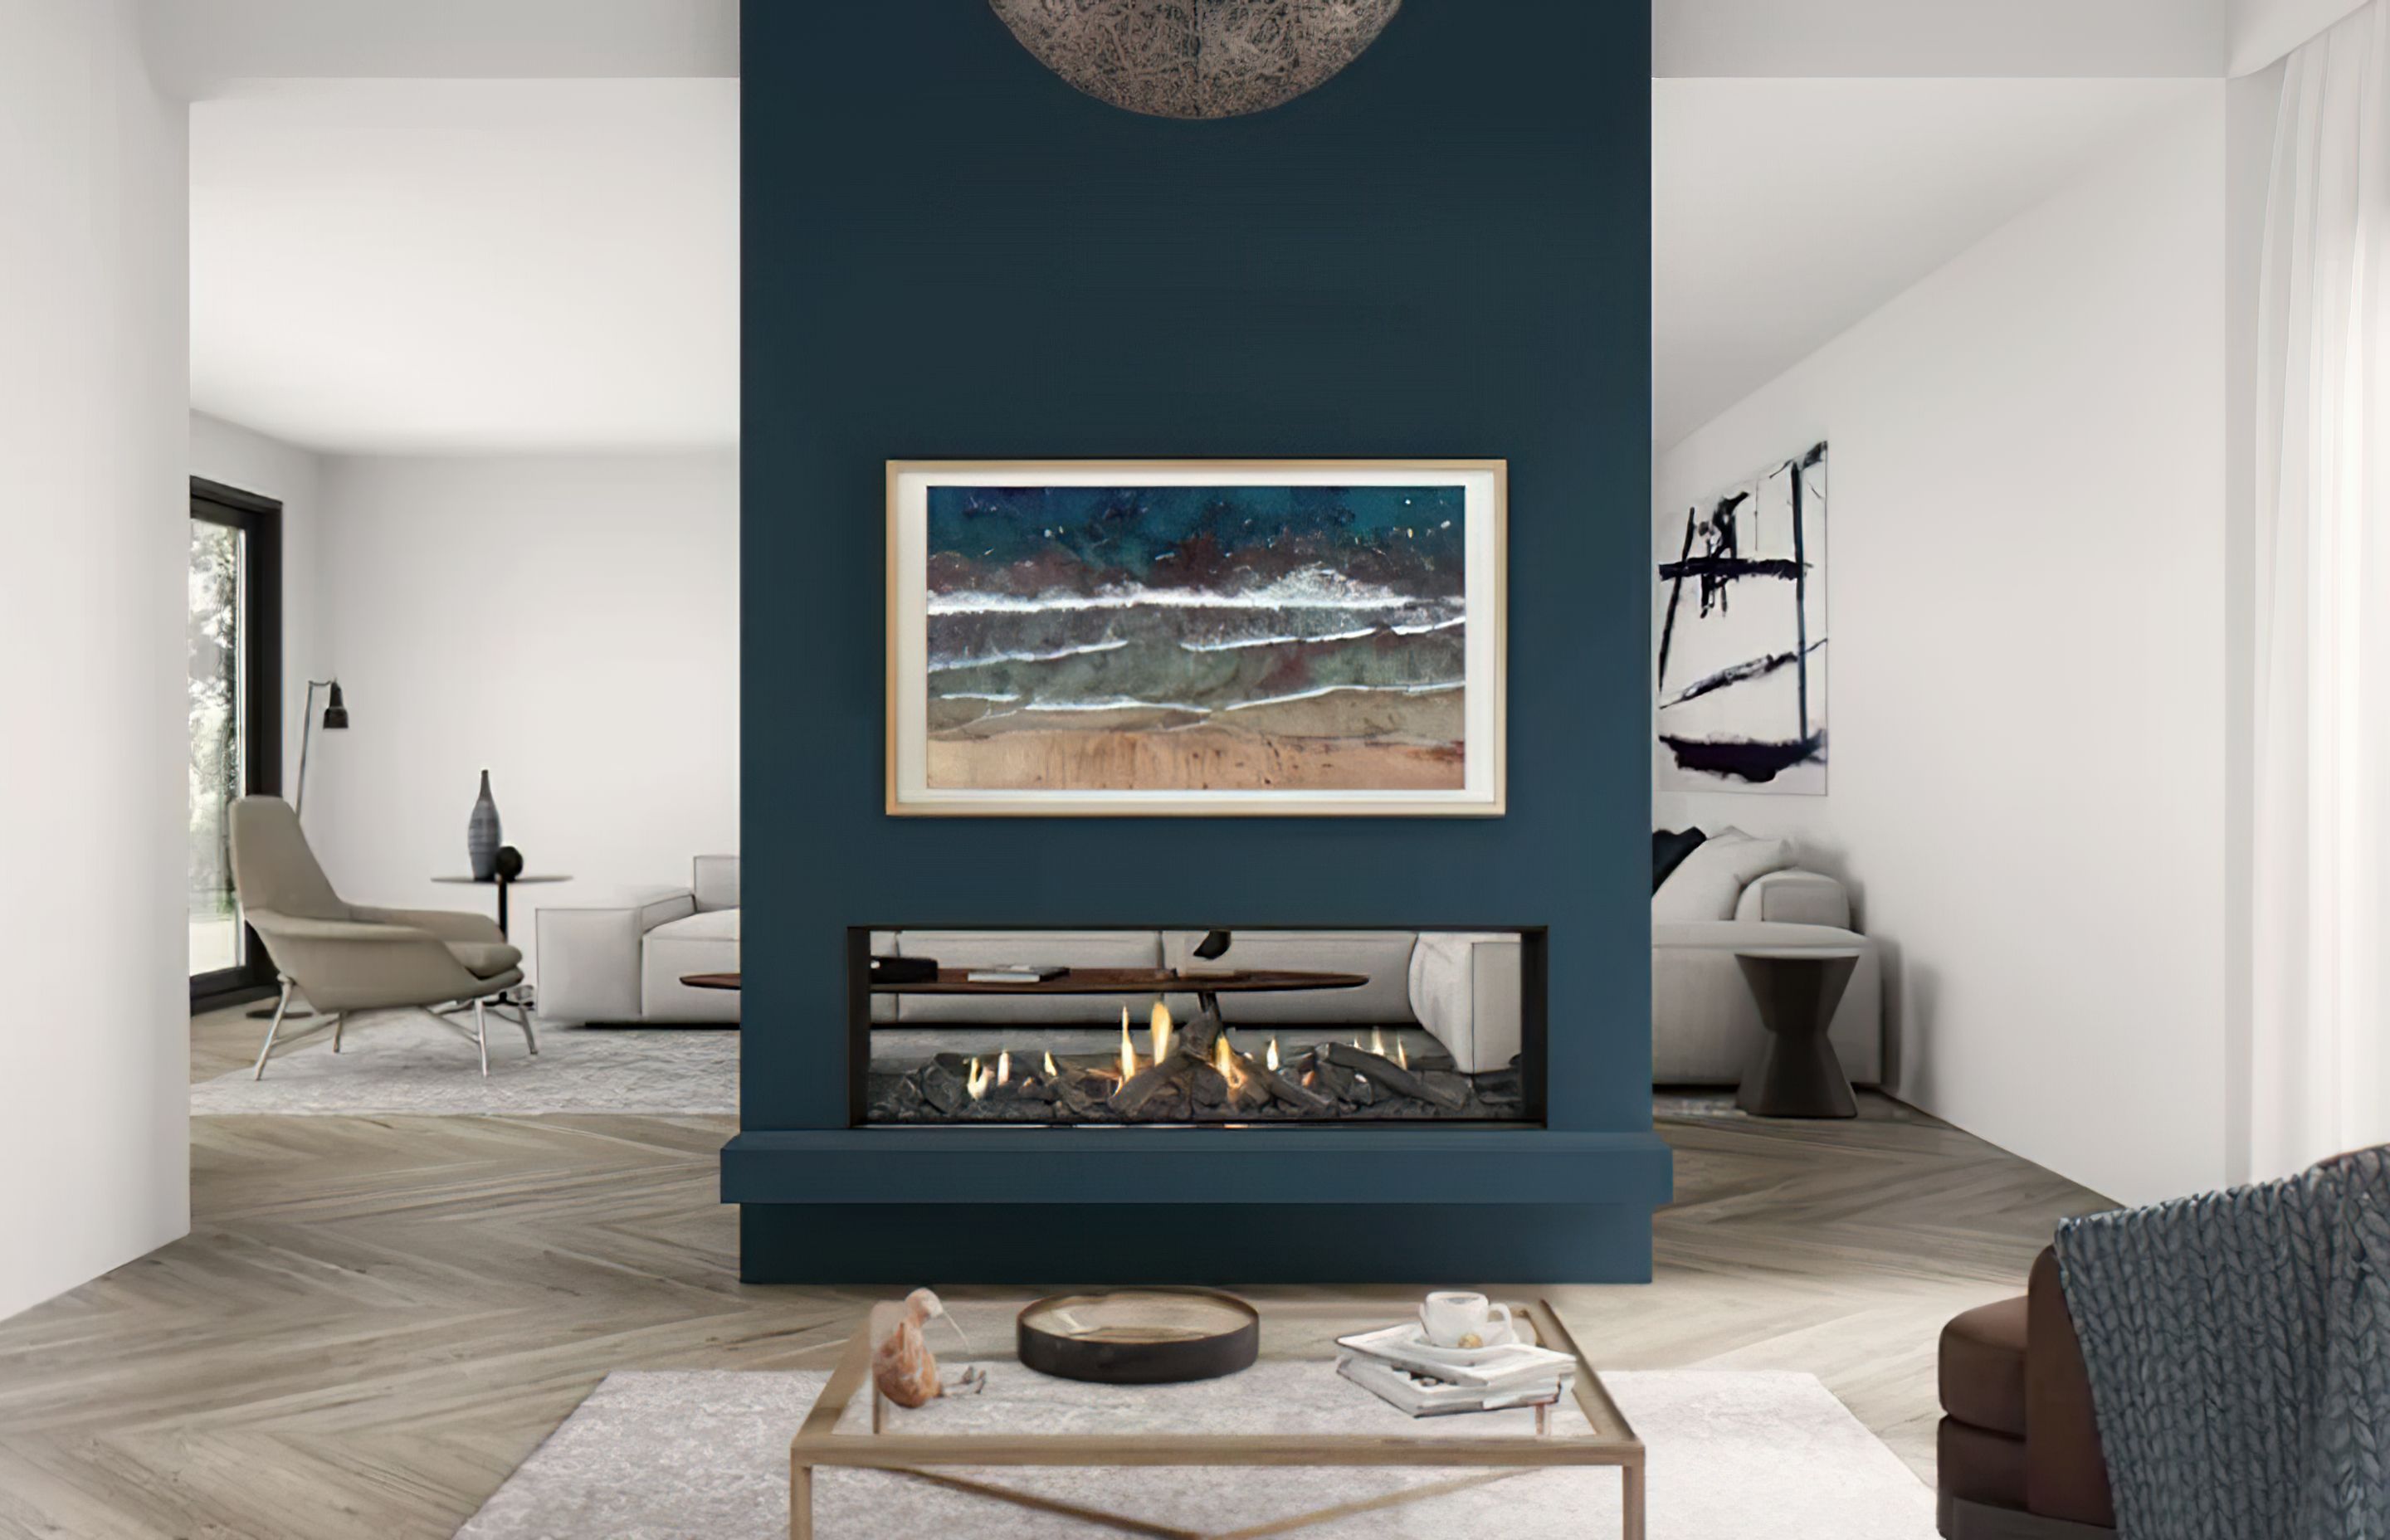 Frame TVs can be enjoyed both day and night | Escea Fireplace x Samsung The Frame TV from The Fireplace Dunedin